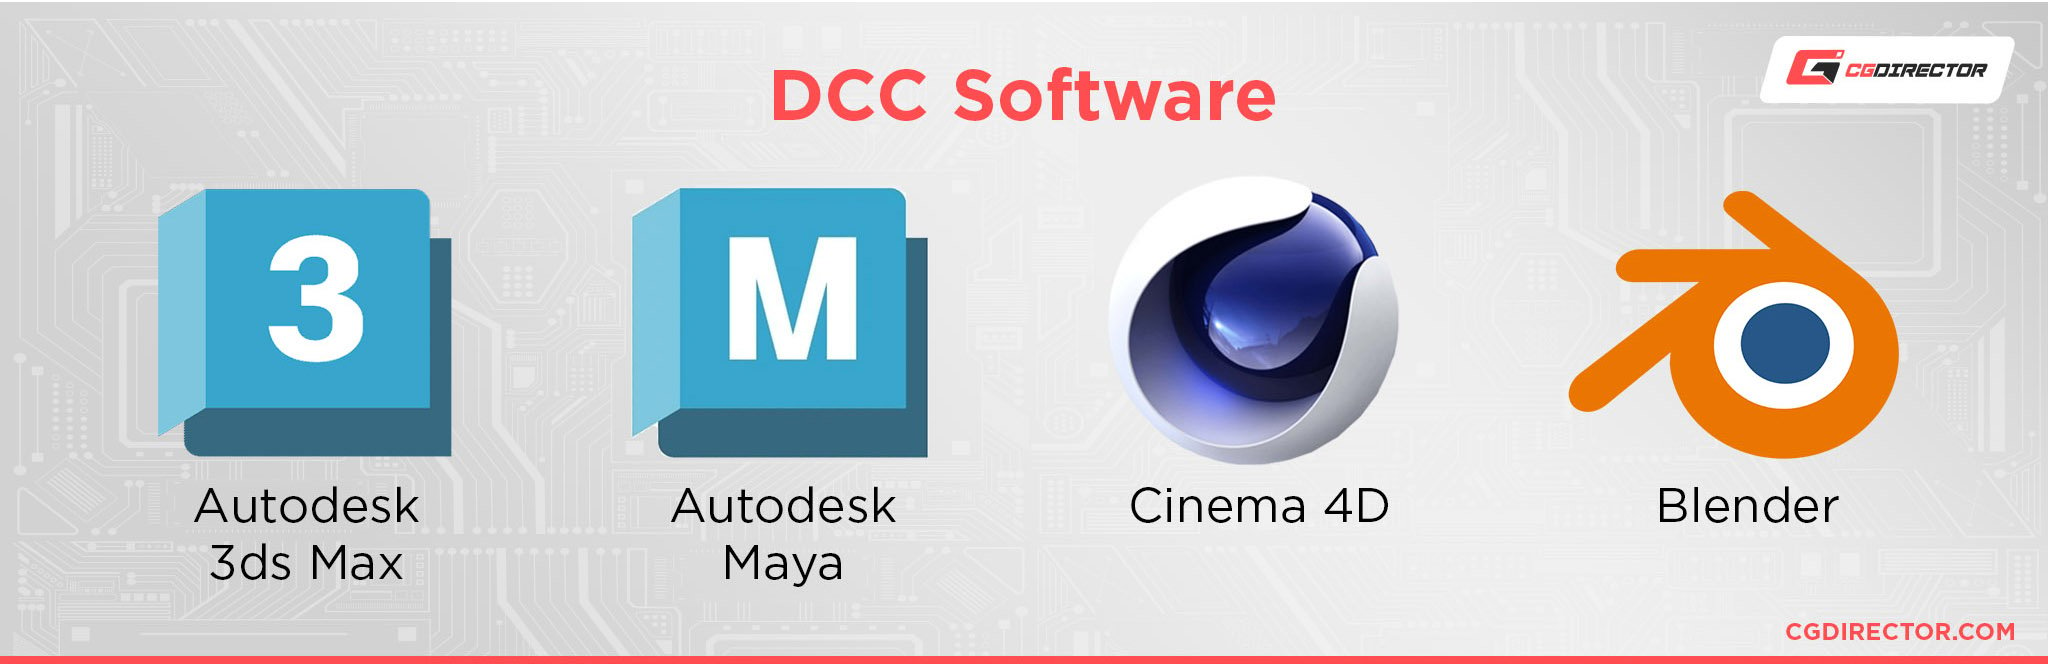 Software DCC